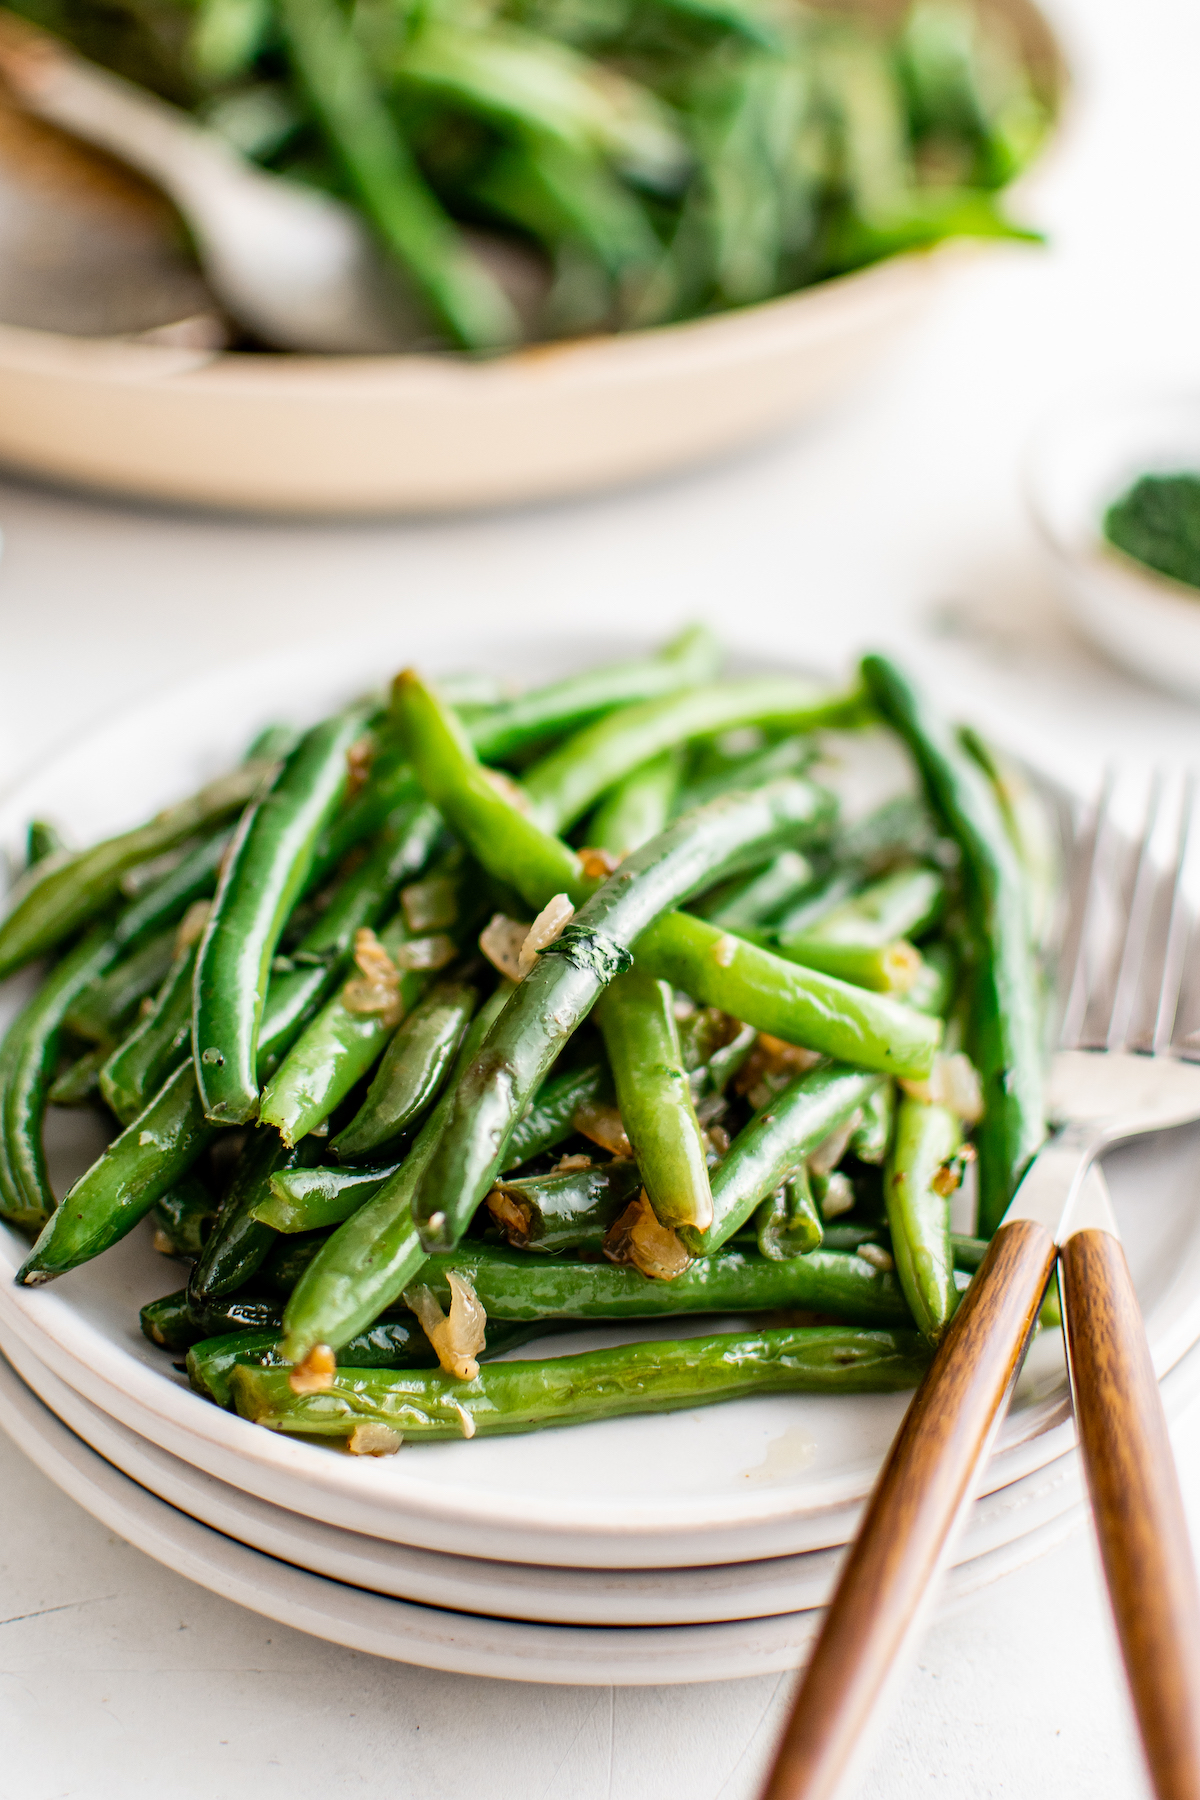 A serving of buttery green beans on a small plate, with a knife and fork.